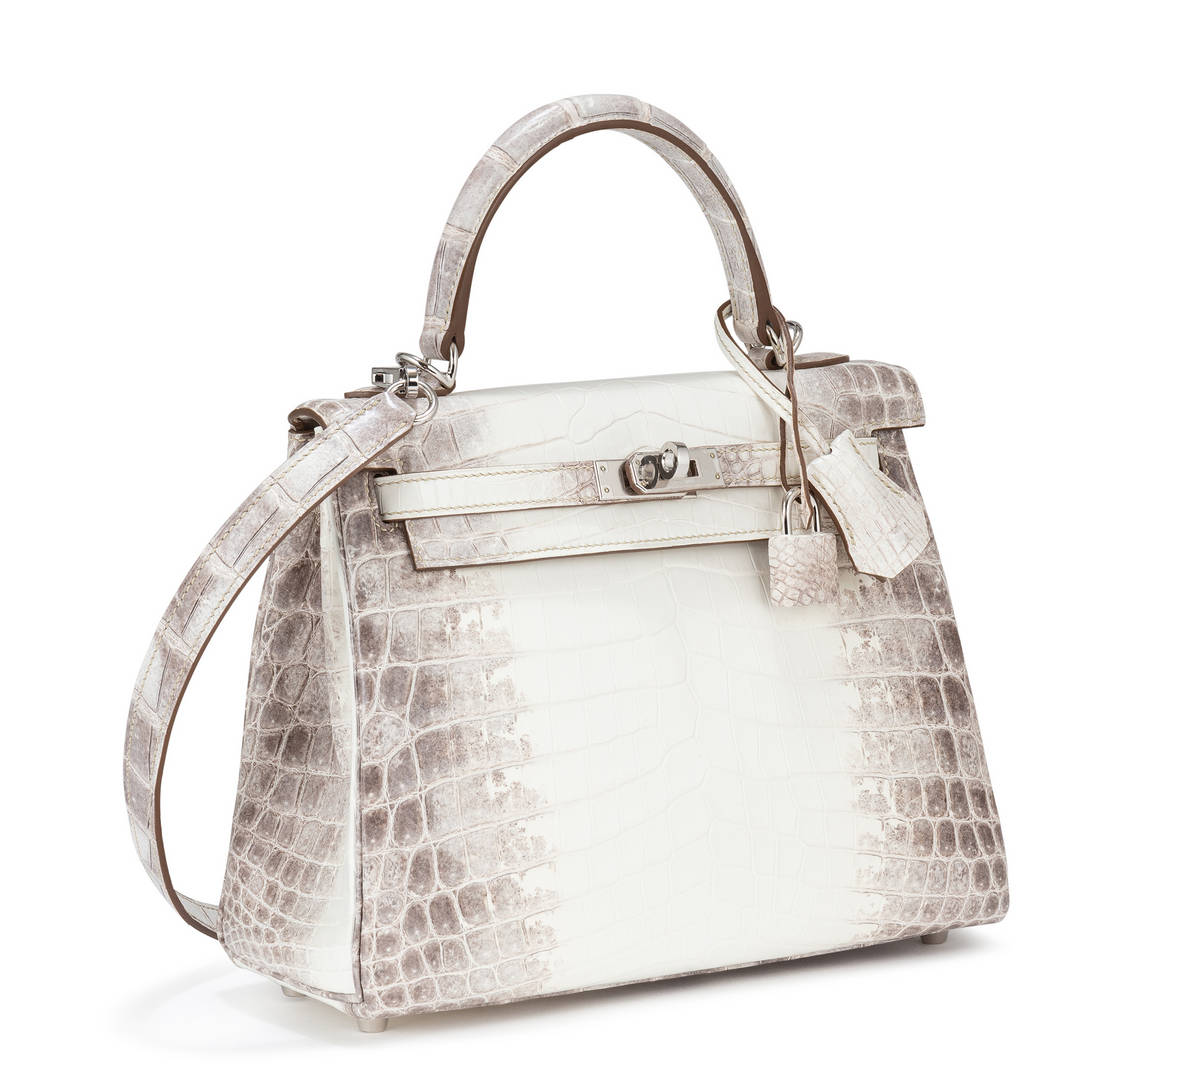 Not a Birkin, but a Hermes Kelly bag sold for a record breaking